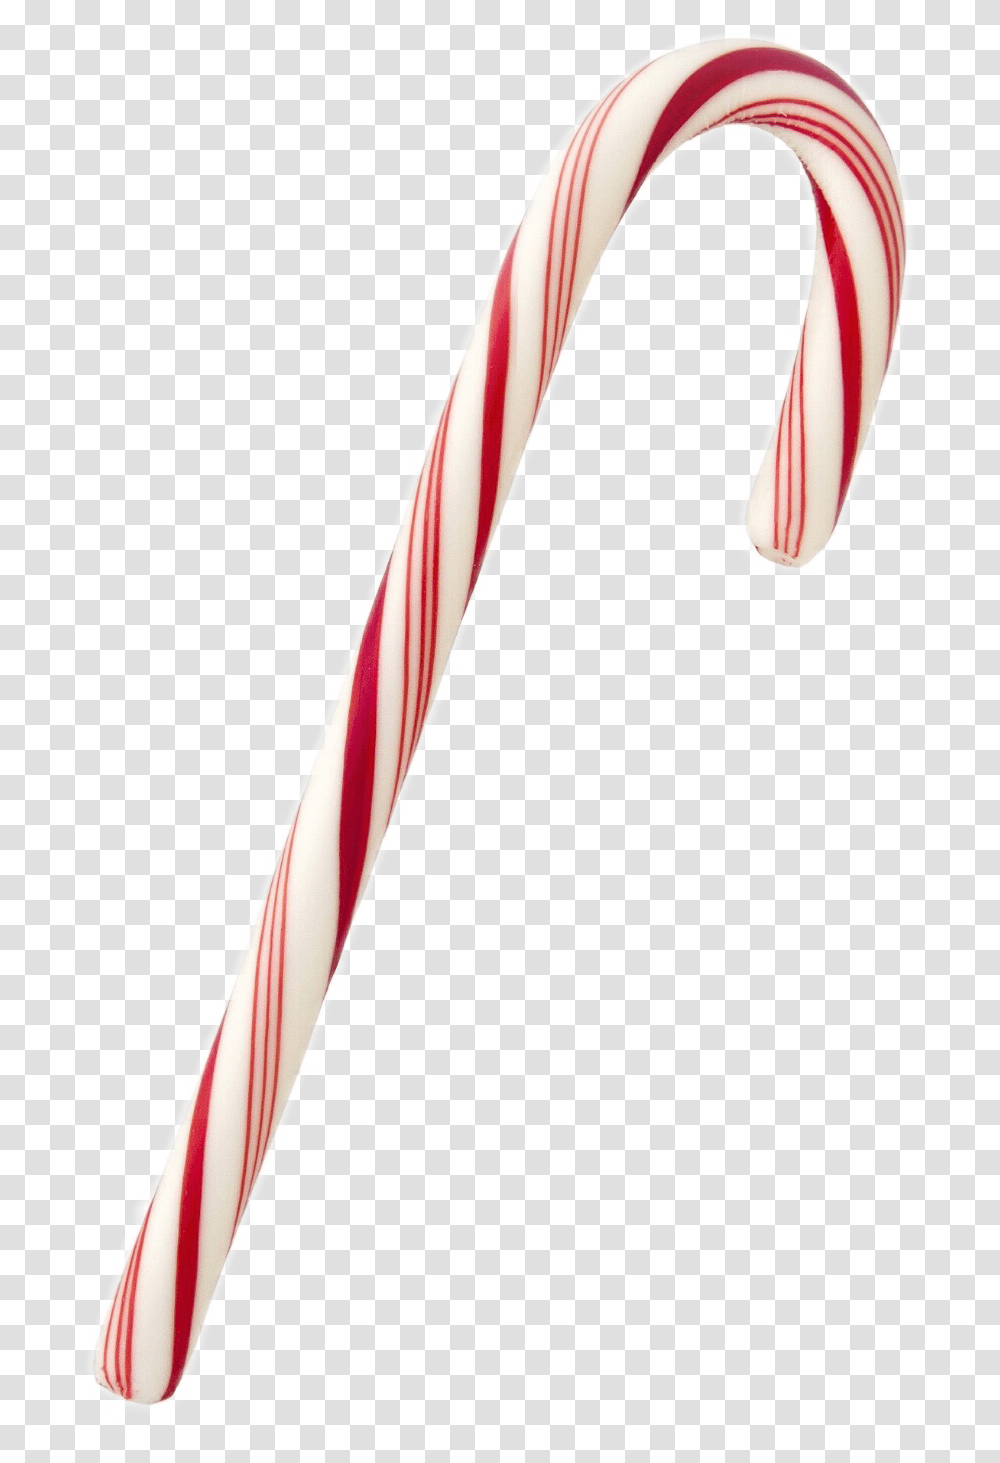 Candycane Christmas Holiday Peppermint Candy Peppermintstick Candy Cane, Food, Sweets, Confectionery Transparent Png